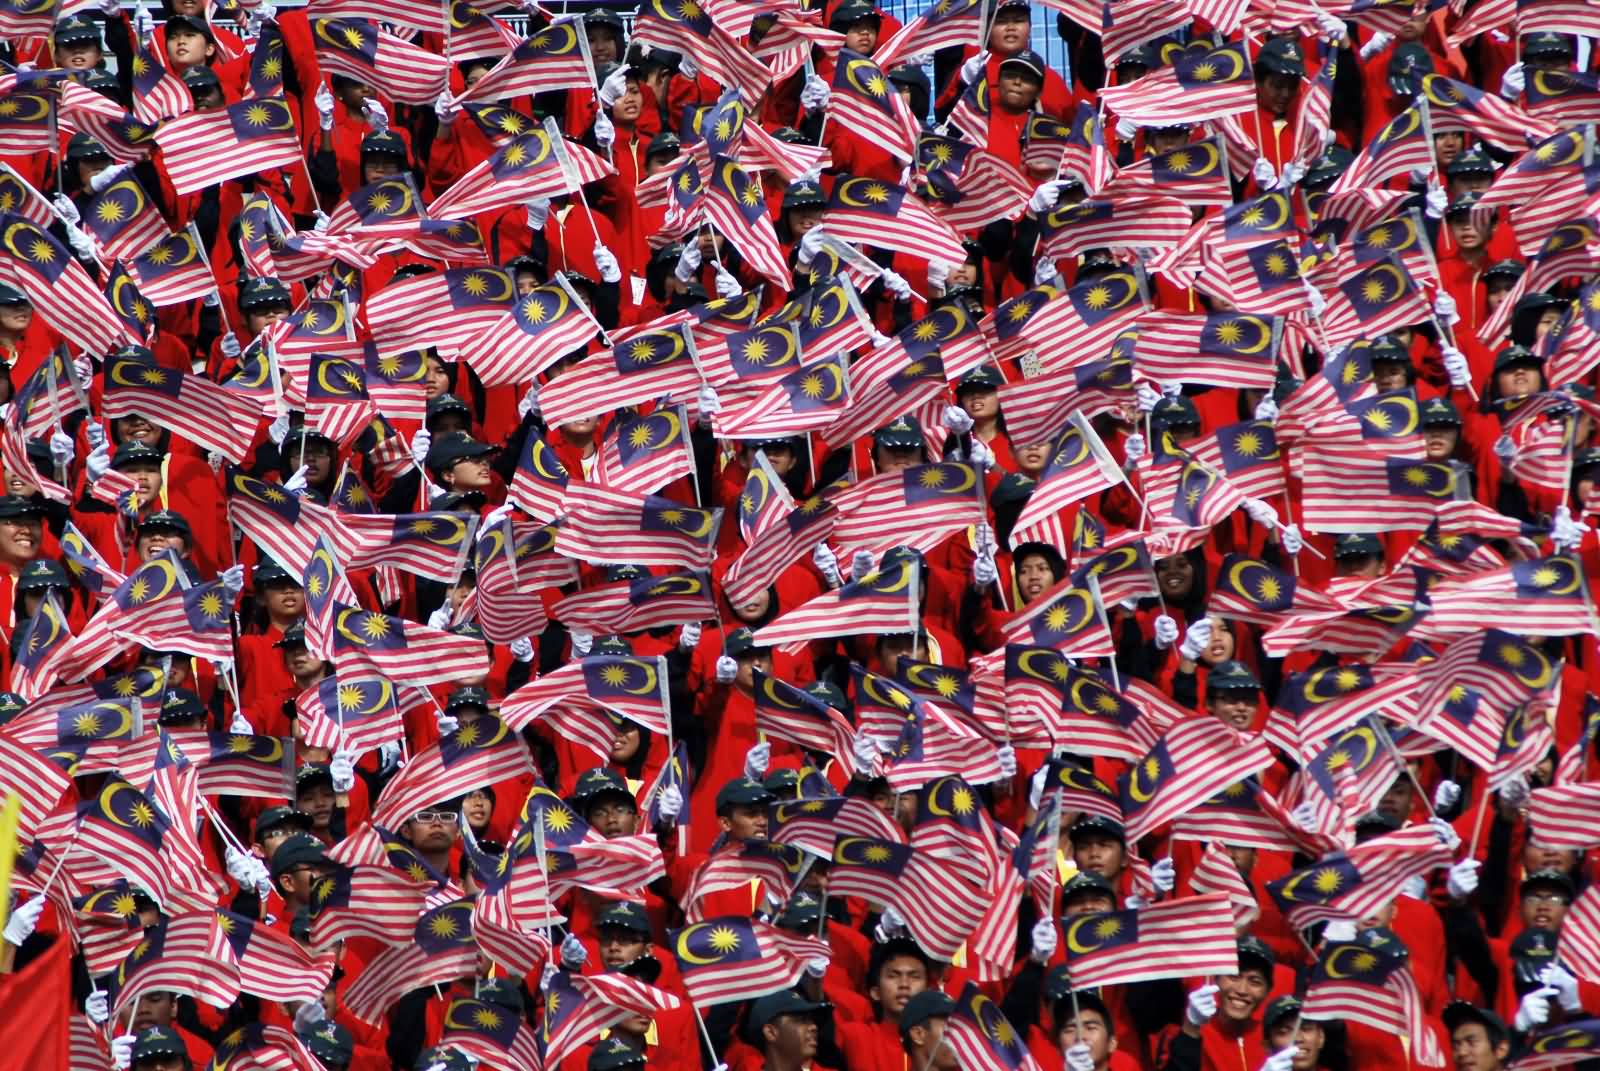 Malaysians Waves Their National Flags During Malaysia Day Celebration